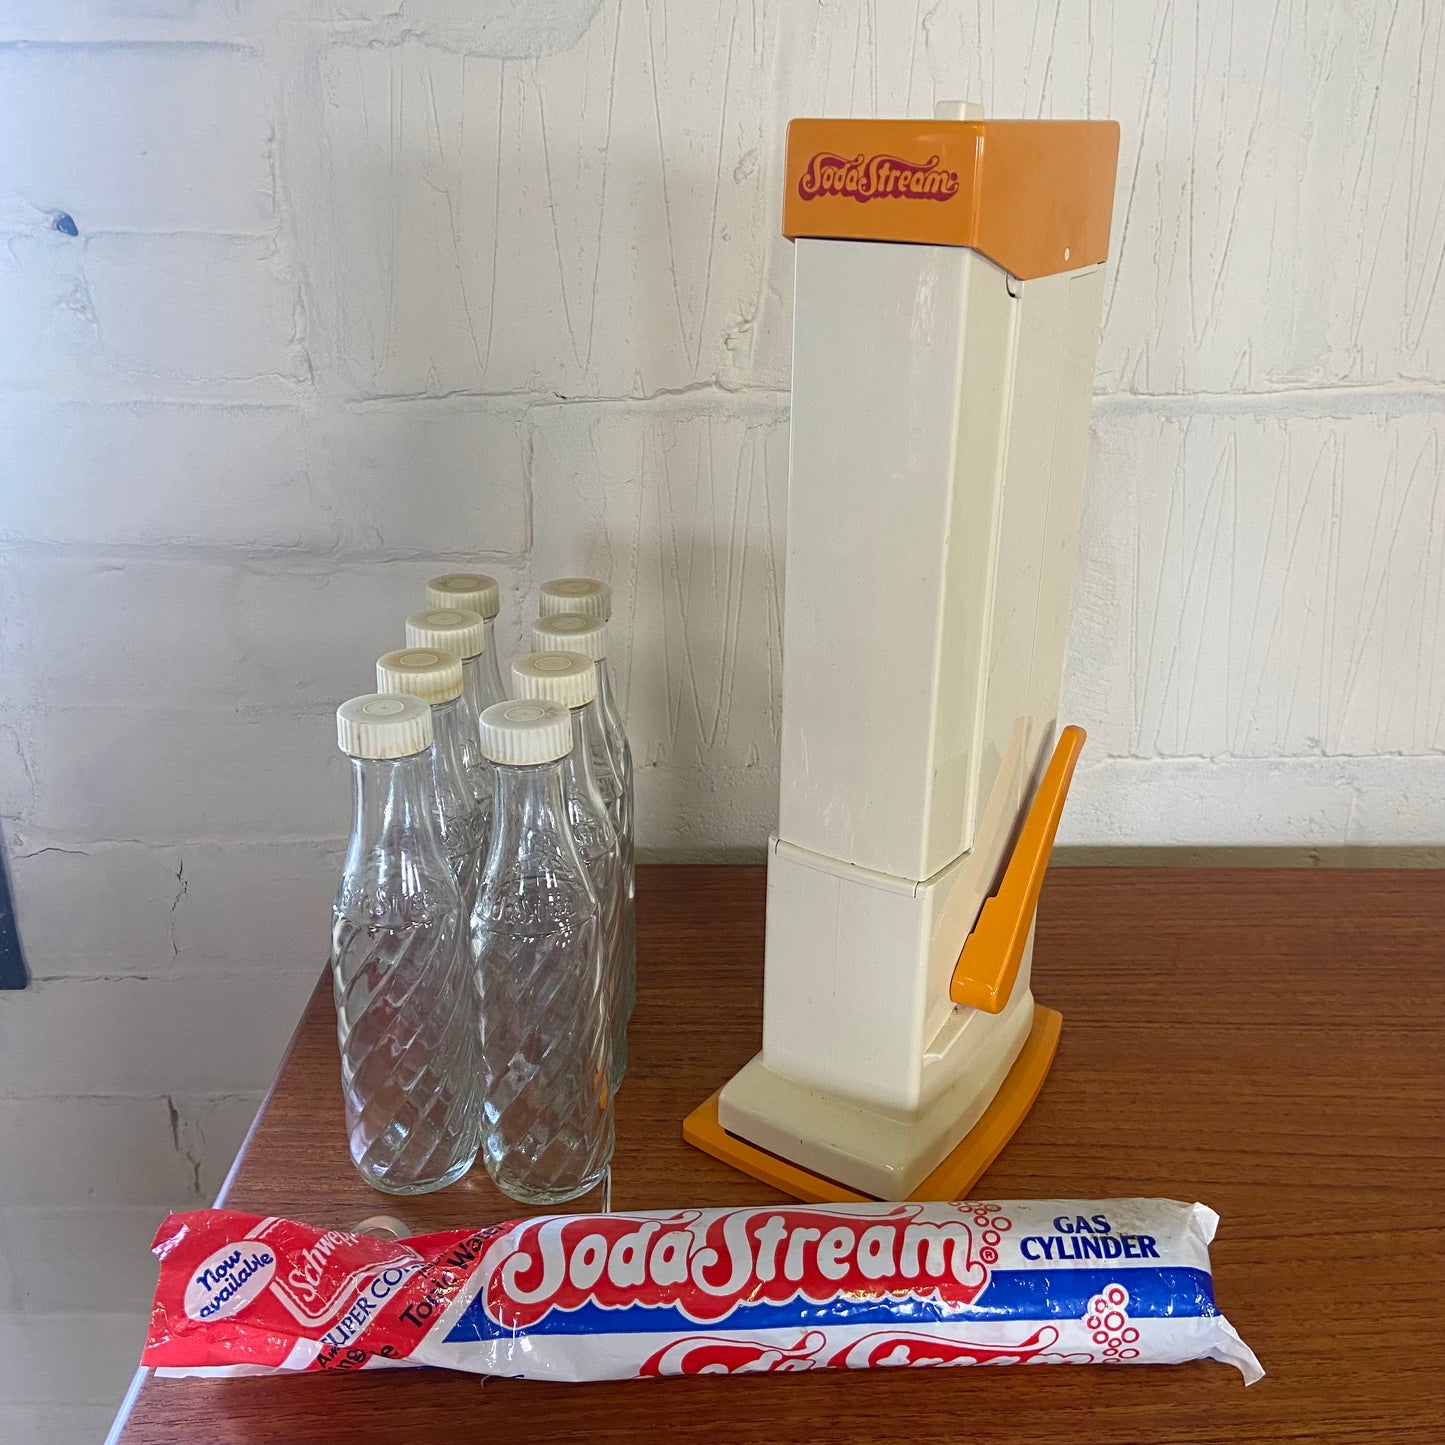 1970s Orange Soda Stream, Bottles and Gas Cannister